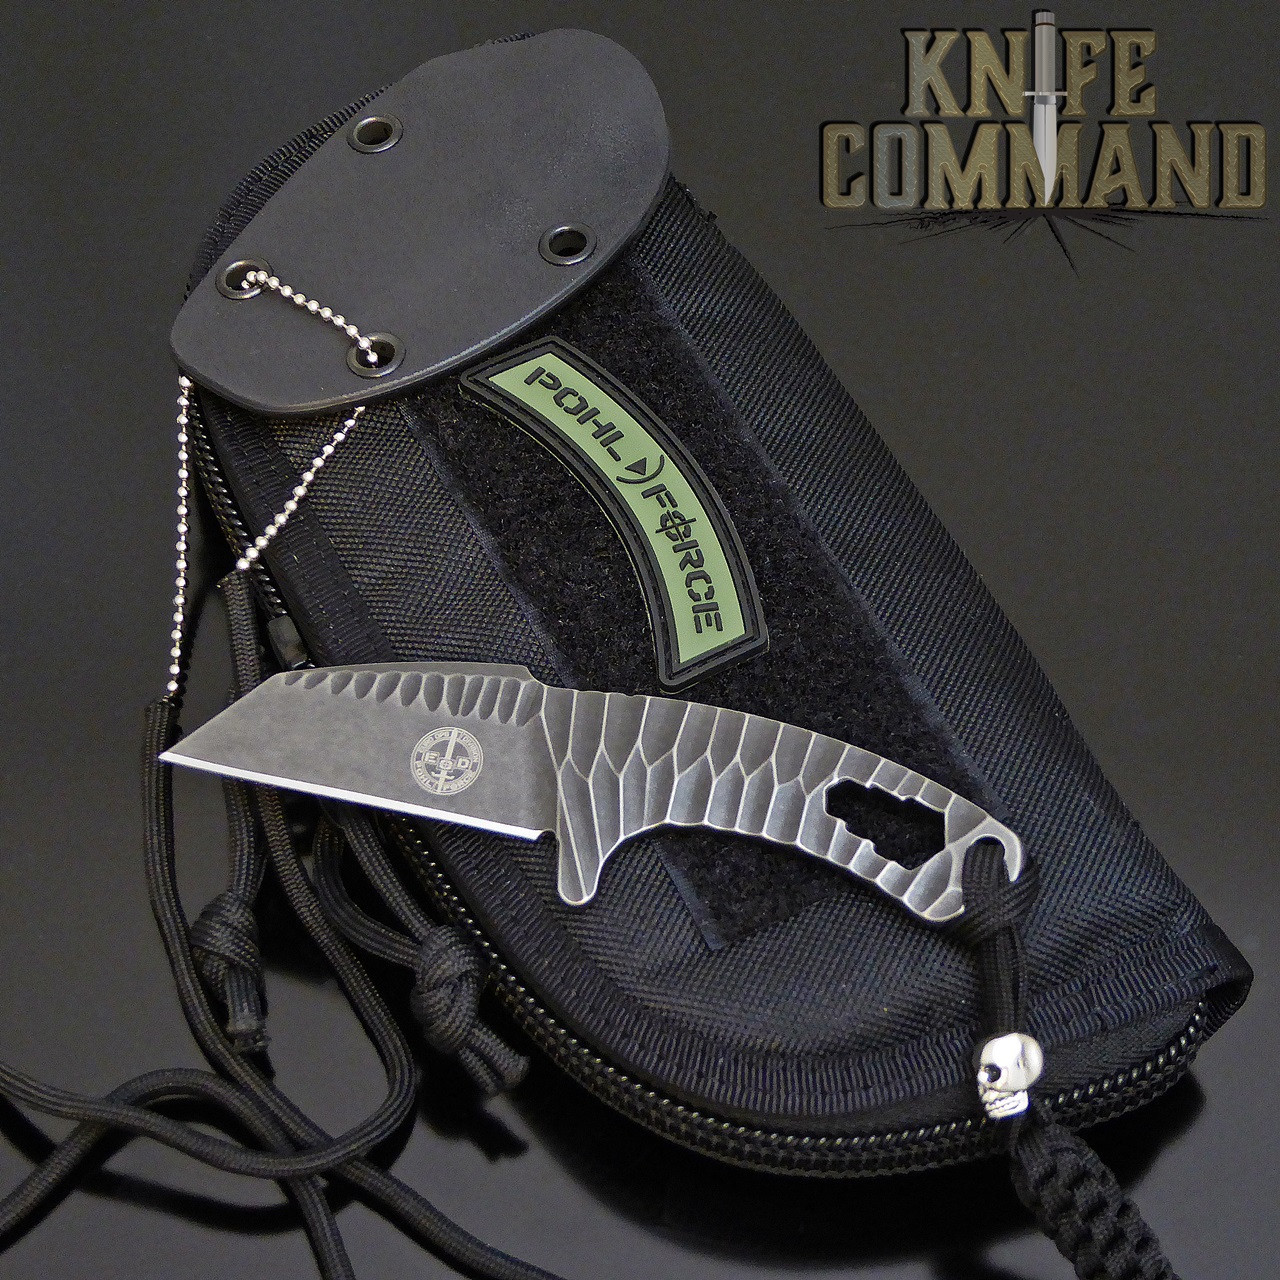 Kydex sheath with covered ball neck chain.